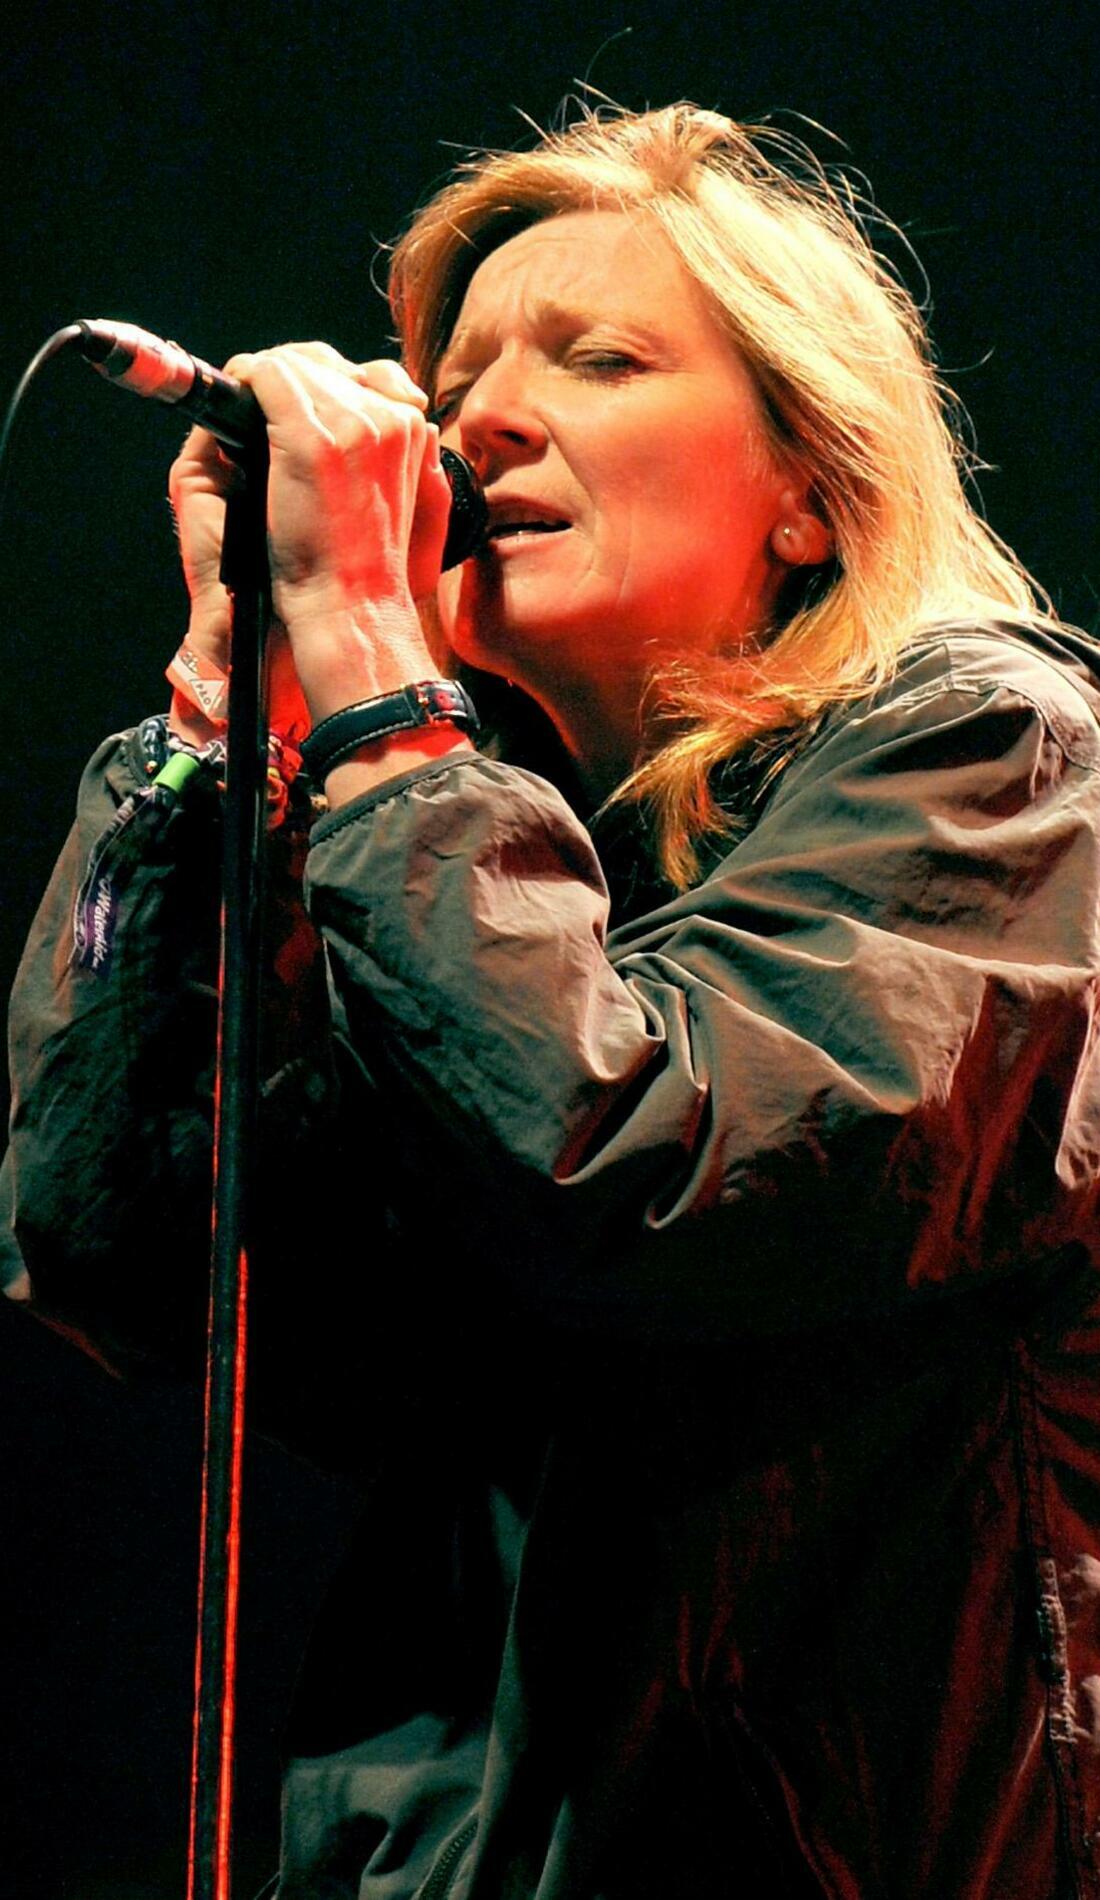 A Portishead live event